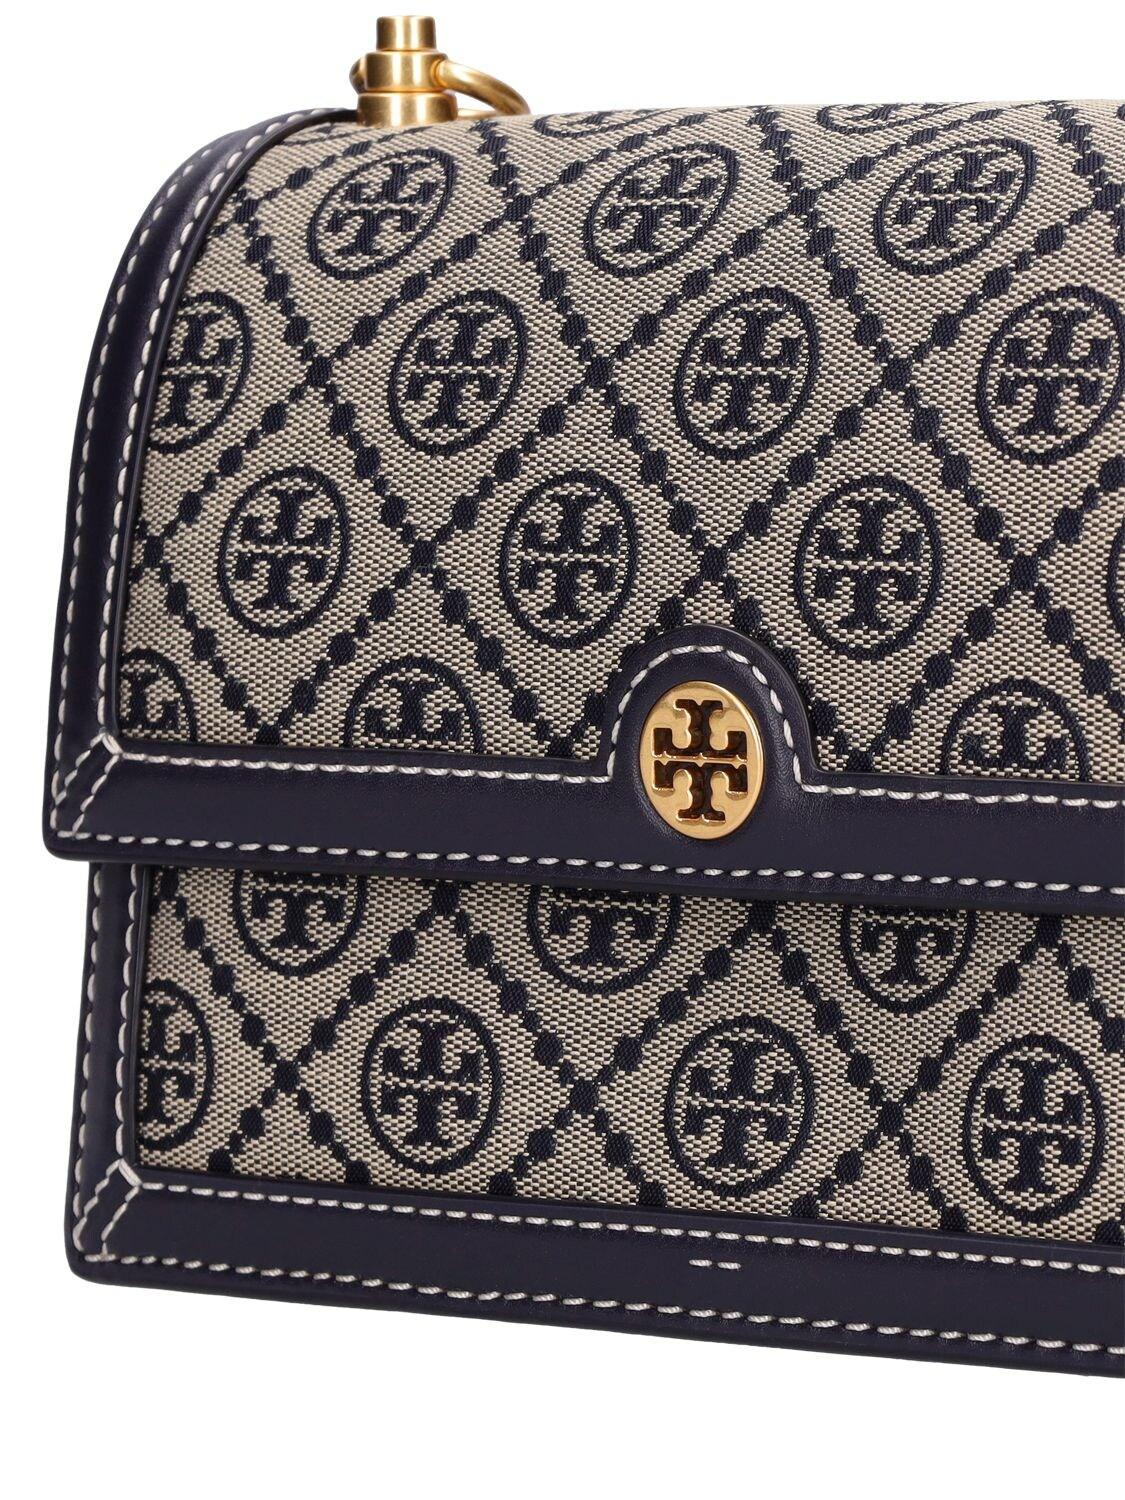 Tory Burch Small T Monogram Canvas Shoulder Bag in Blue | Lyst UK